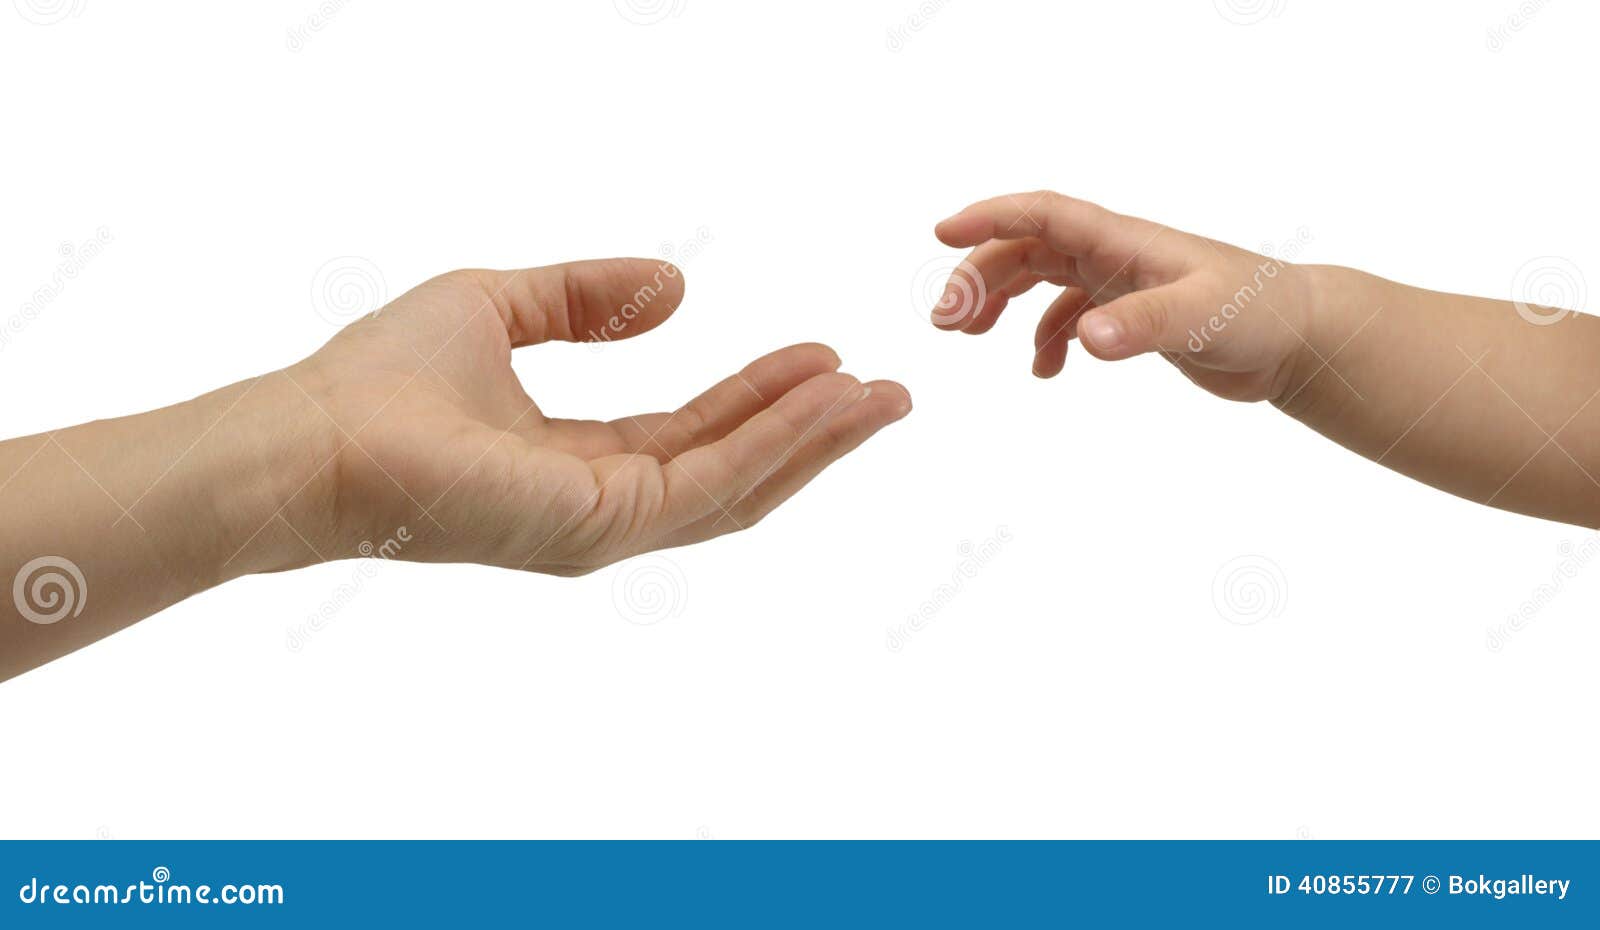 child hand reaching for adult